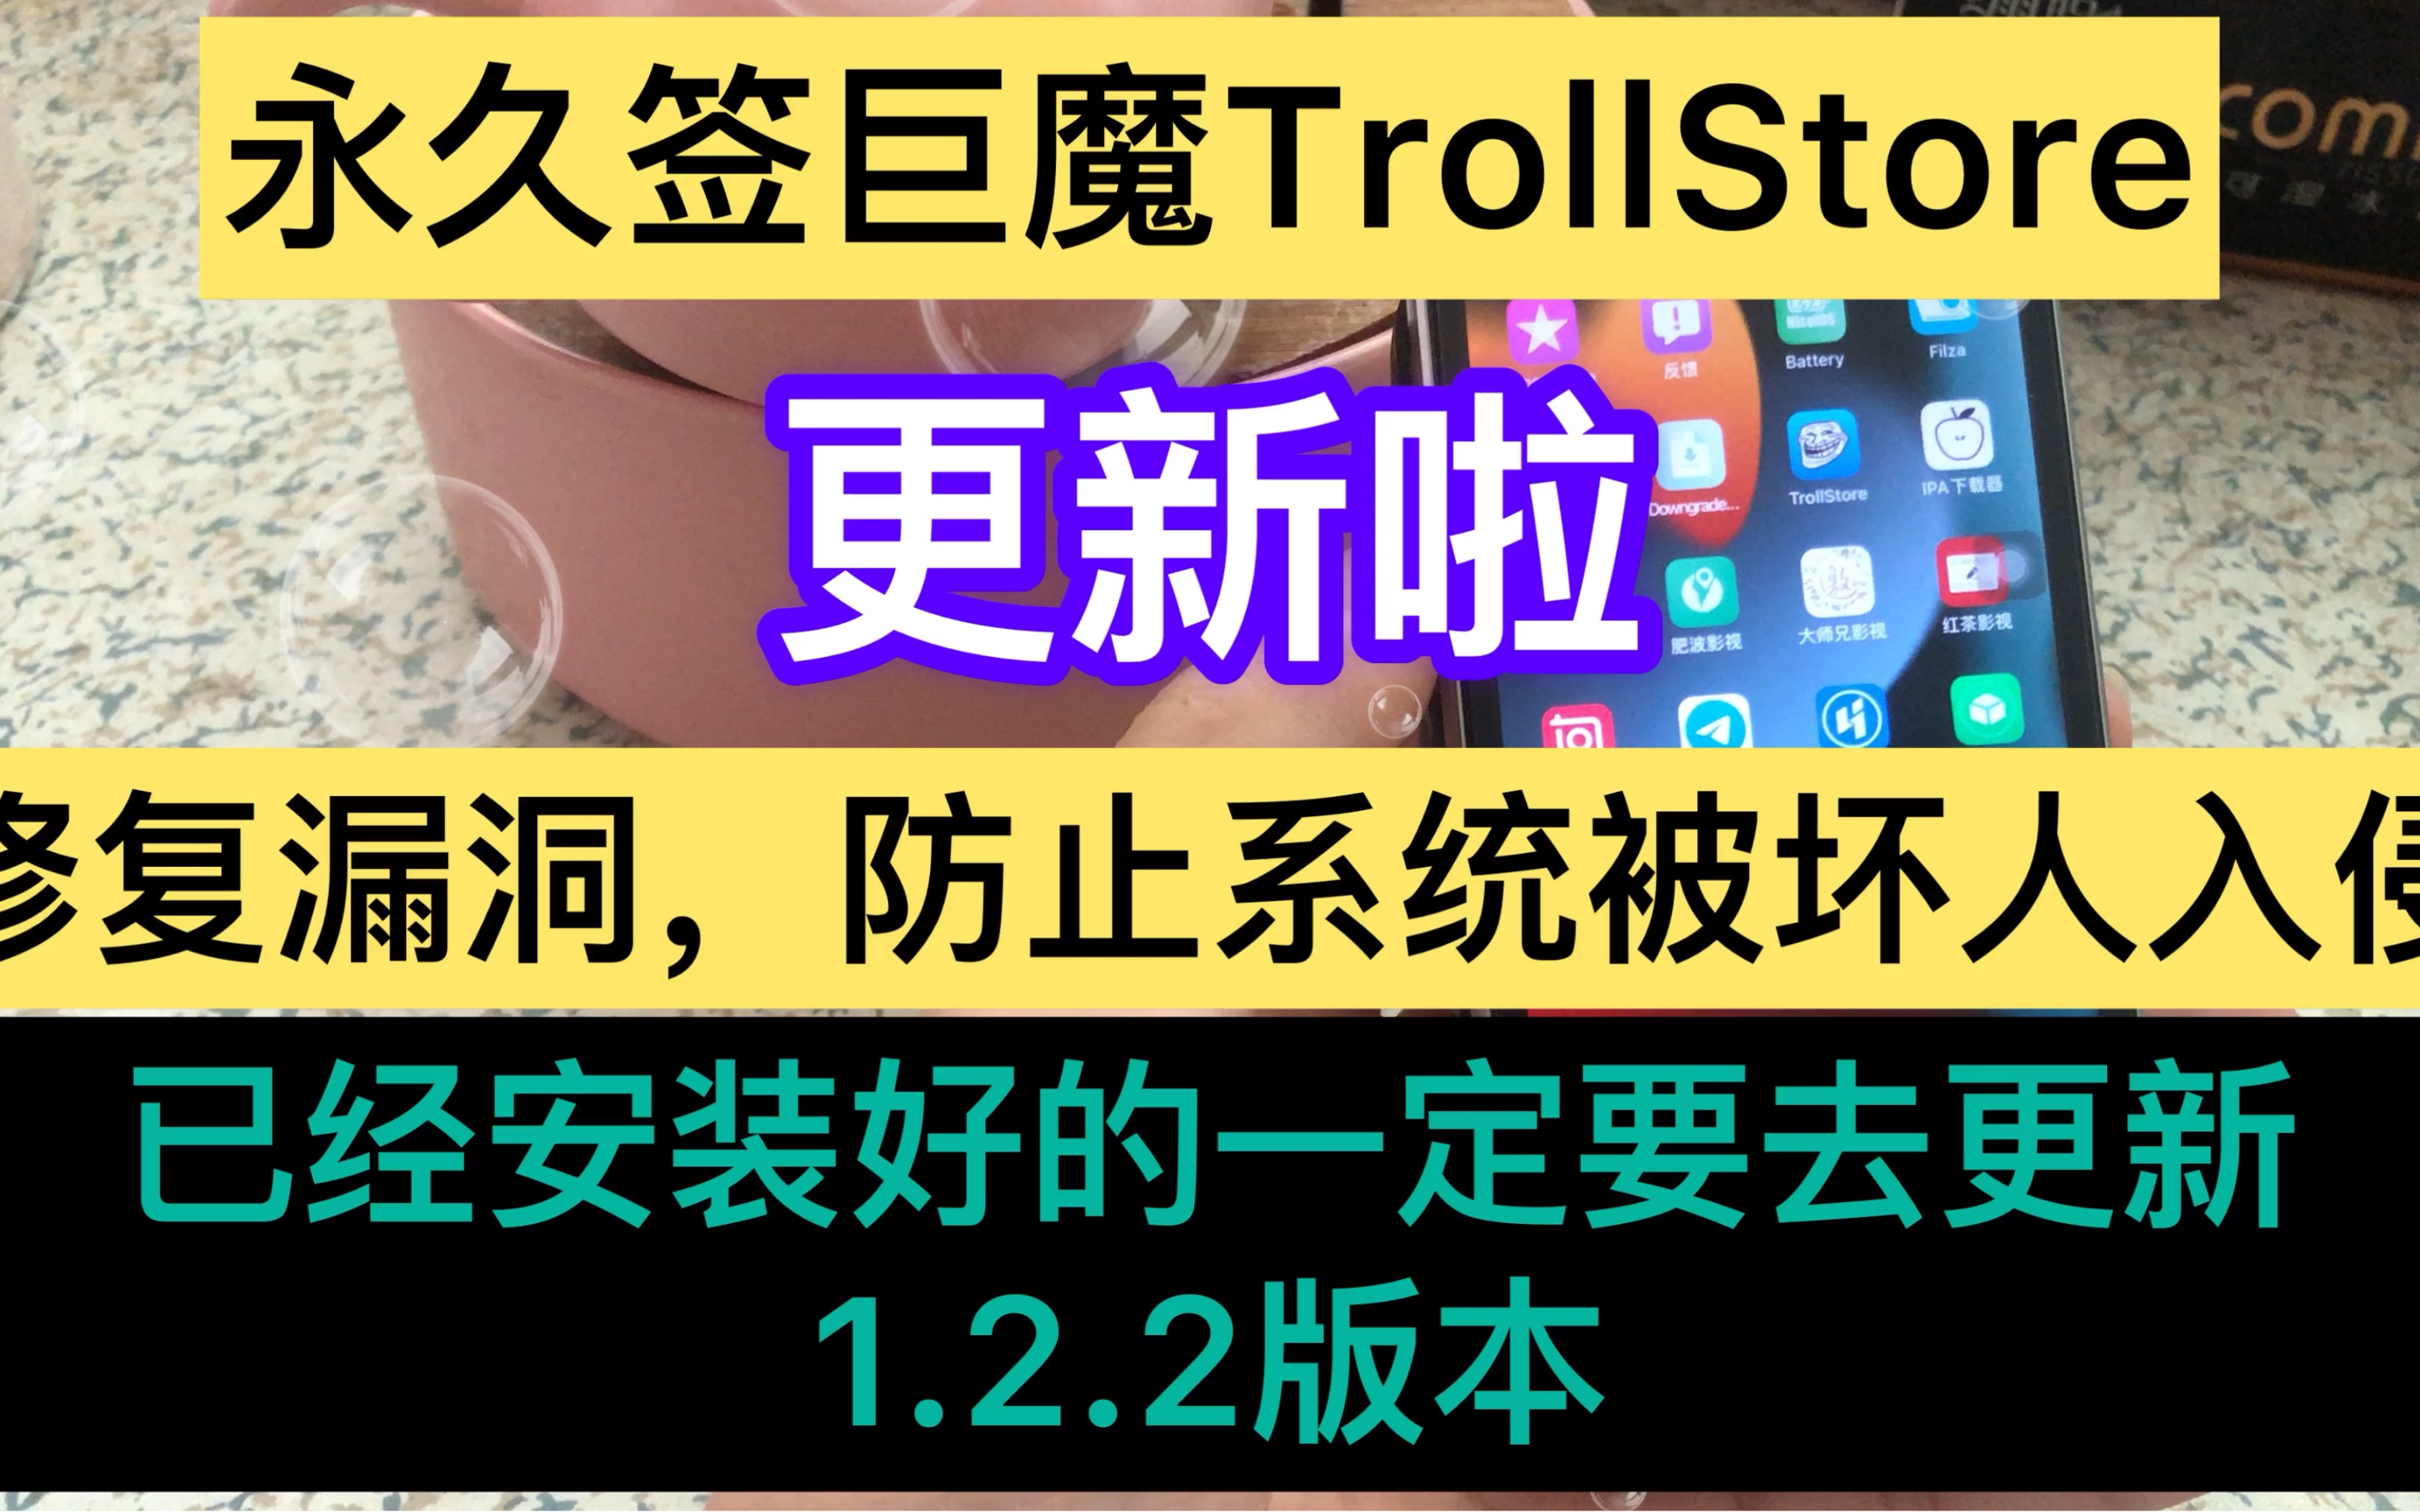 How To Install TrollStore 2 Without PC iPhone (A12 - A17, M1-M2) - (iOS 15 - 16.6 beta 1) - ICTfix